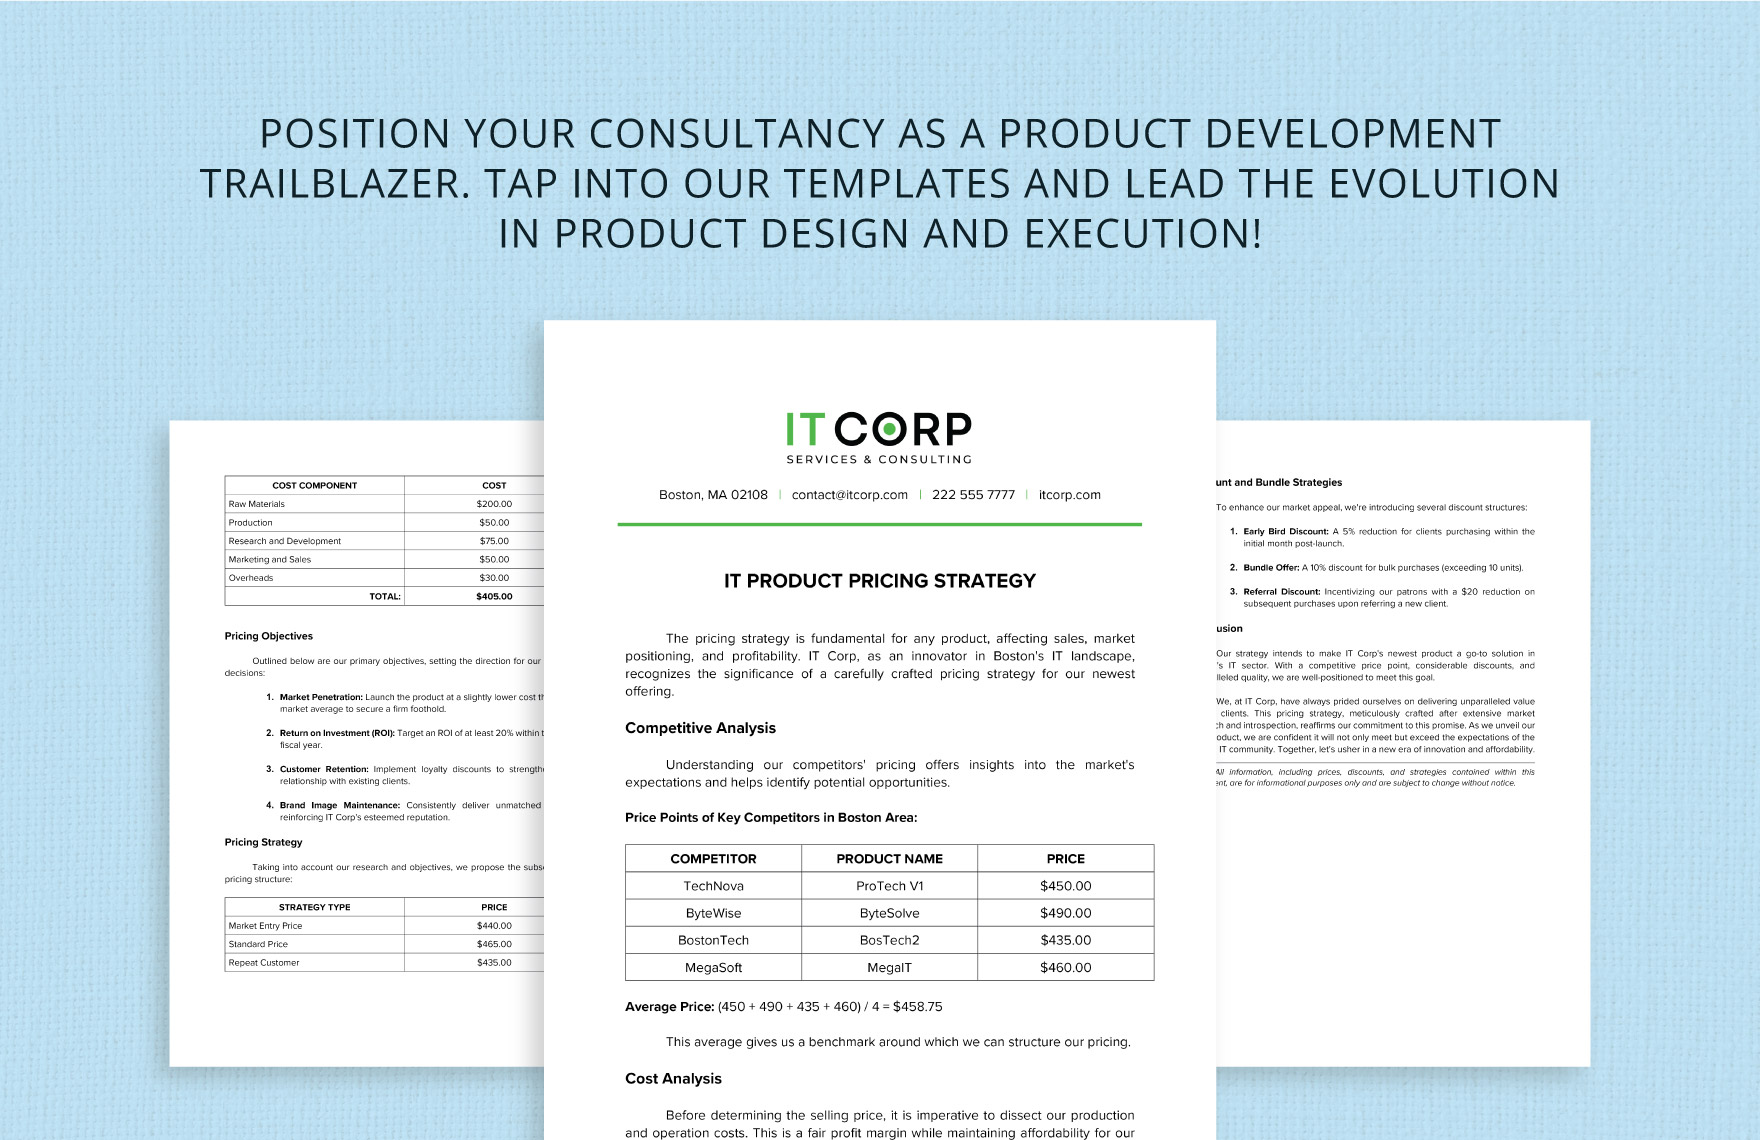 IT Product Pricing Strategy Template